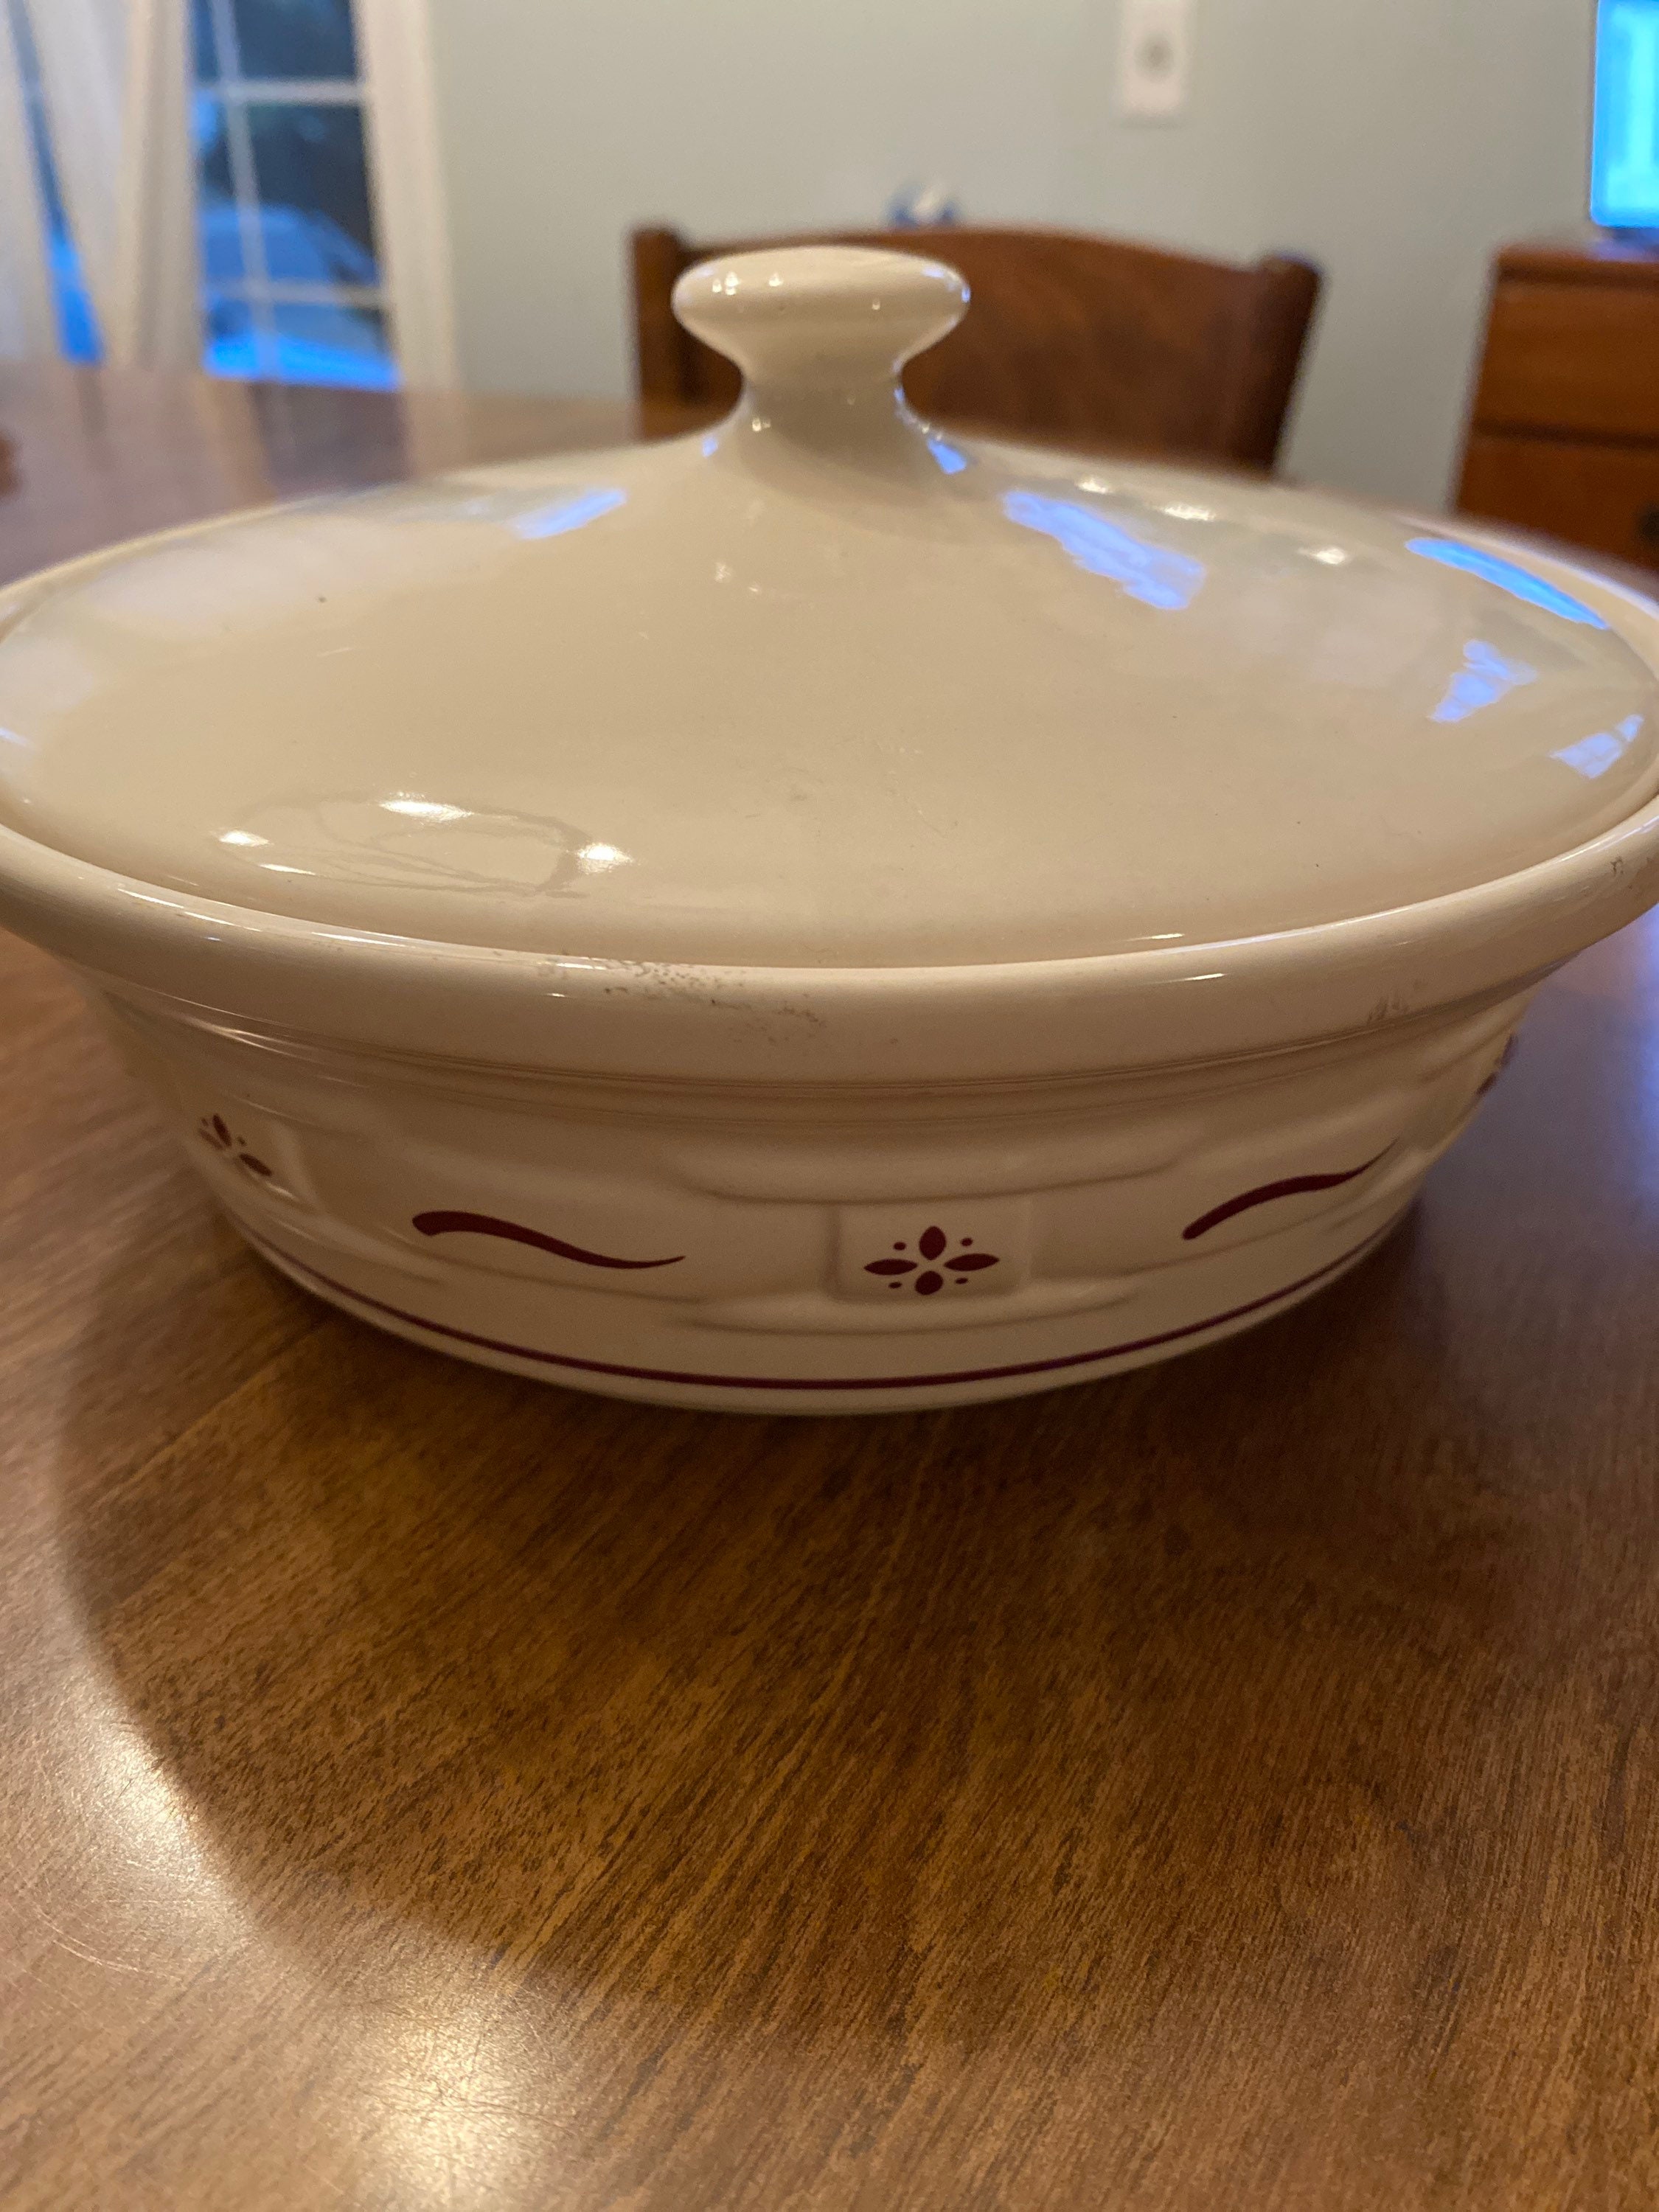 At Auction: Longaberger Pottery Woven Traditions Red Covered Casserole 2  1/2 x 8 1/4 in. (6.4 x 21 cm.)